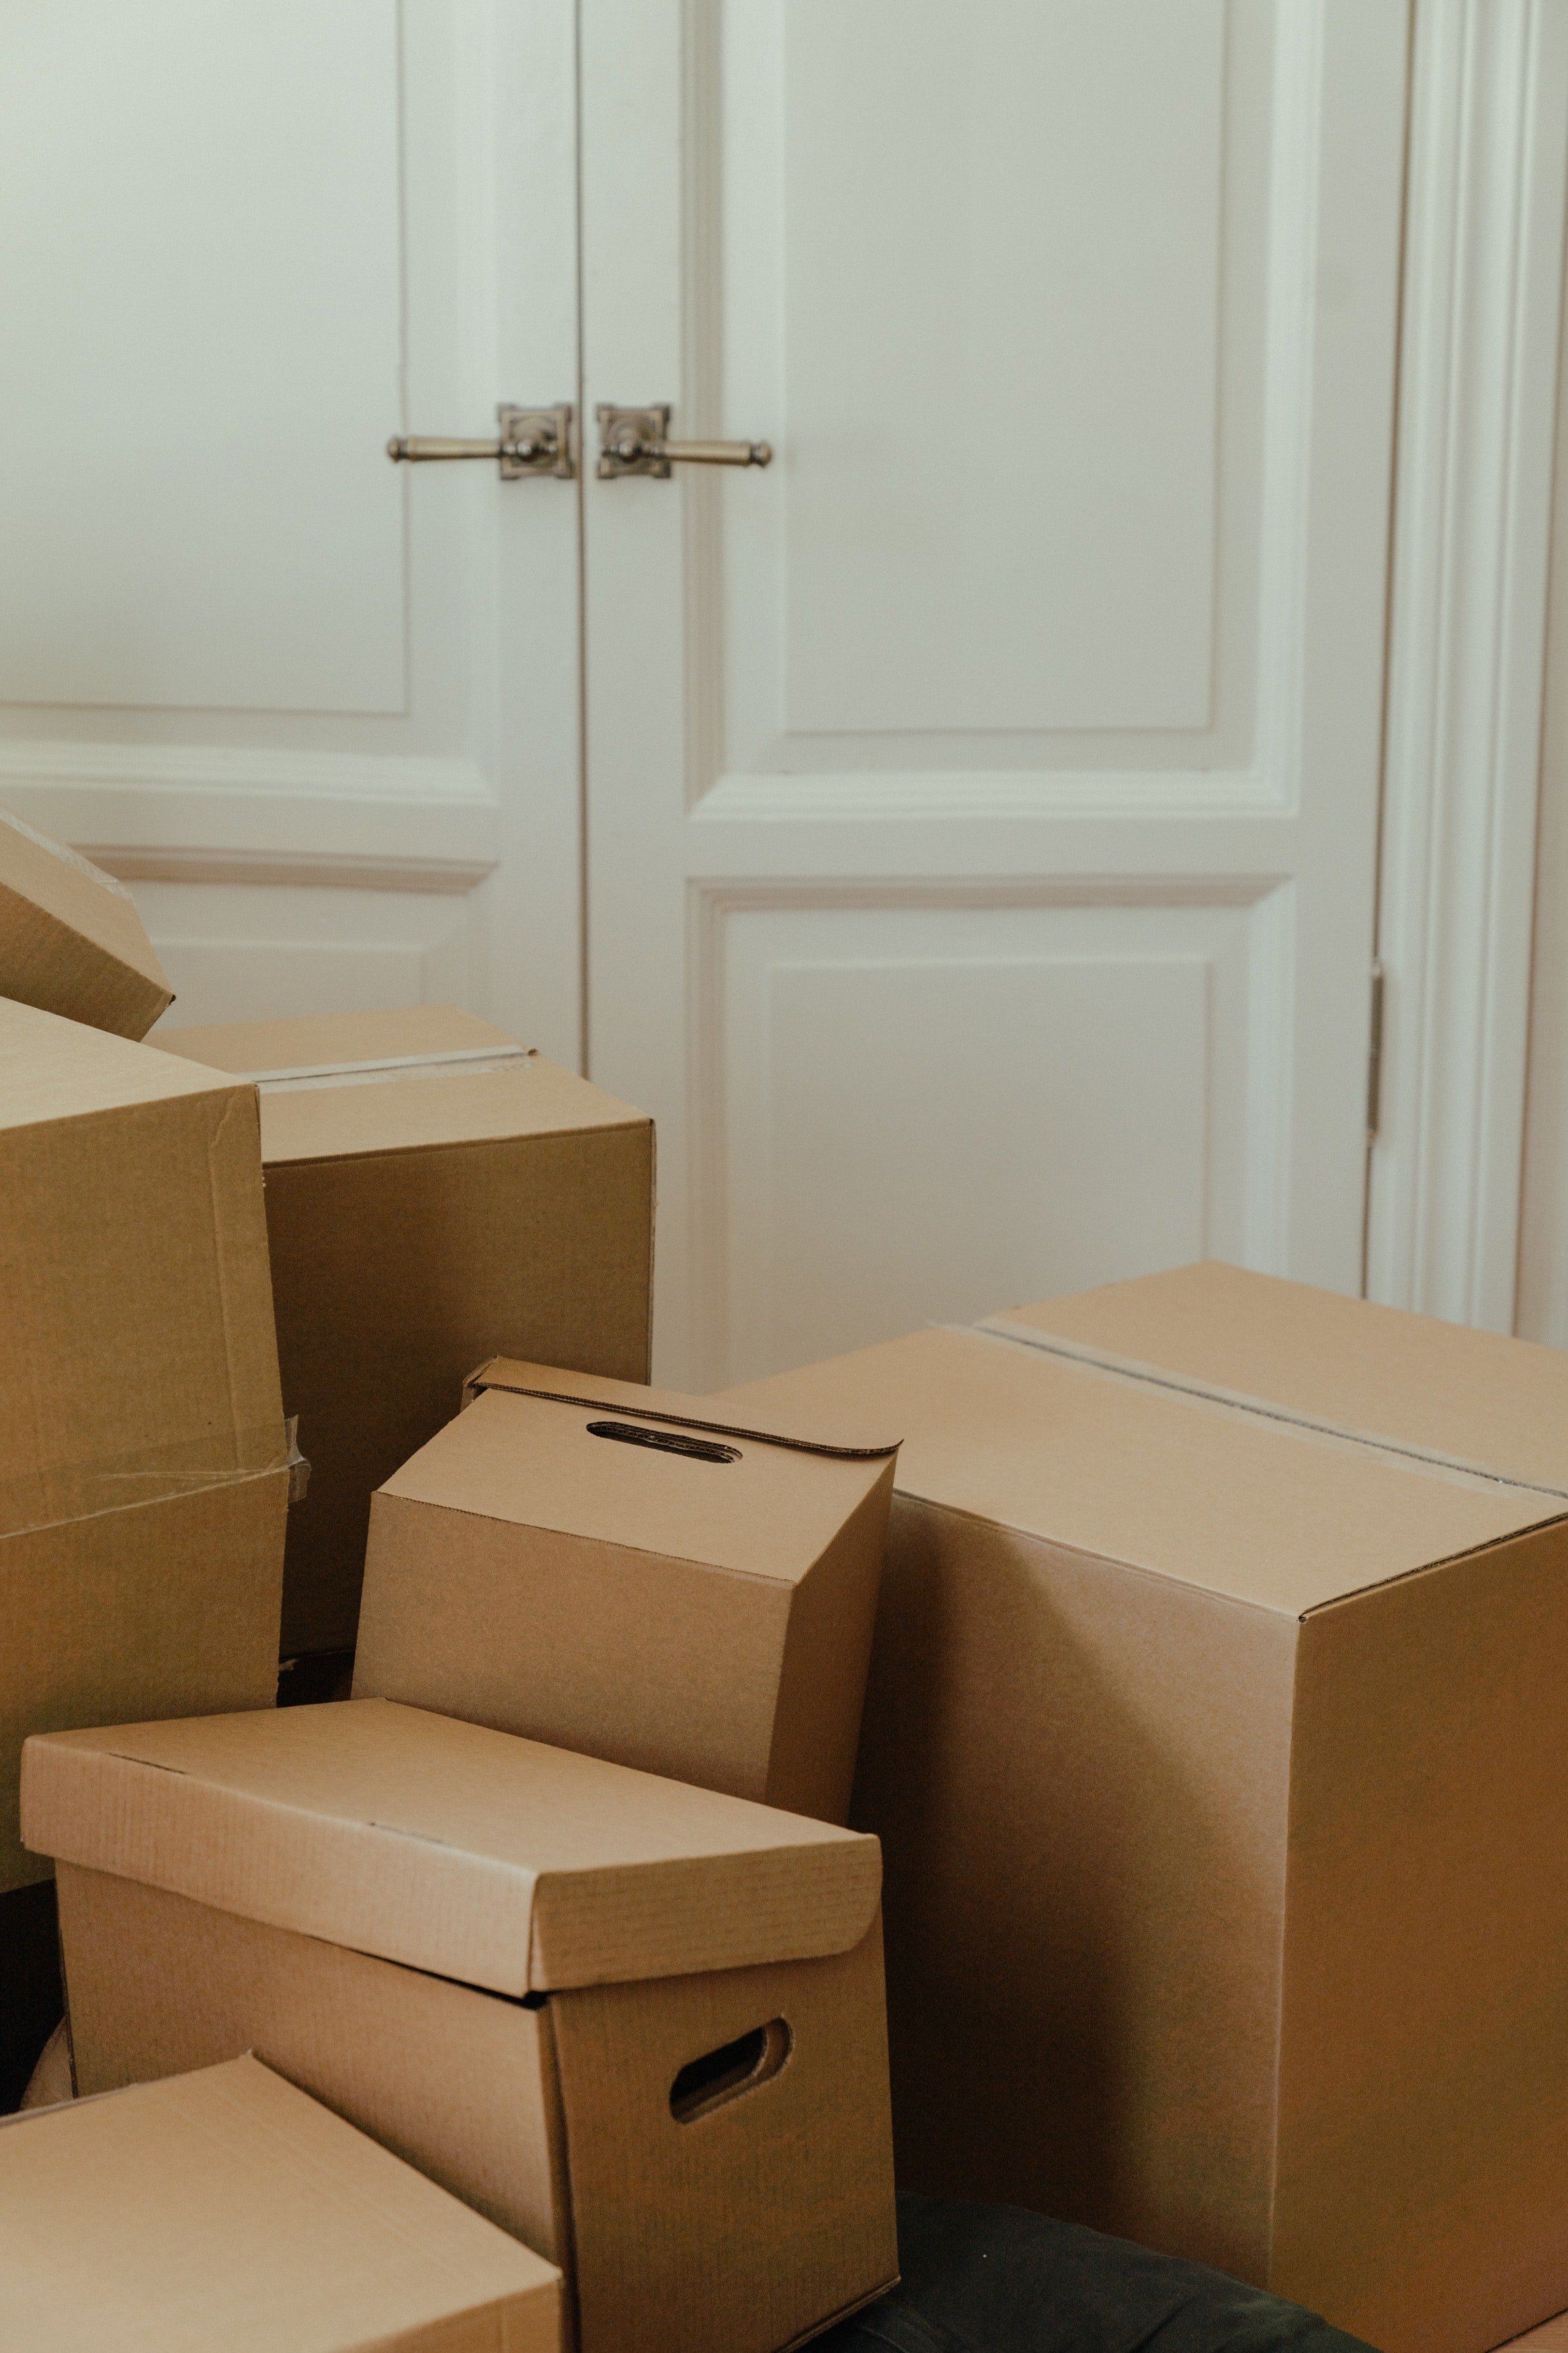 Empty boxes in a room. | Photo: Pexels